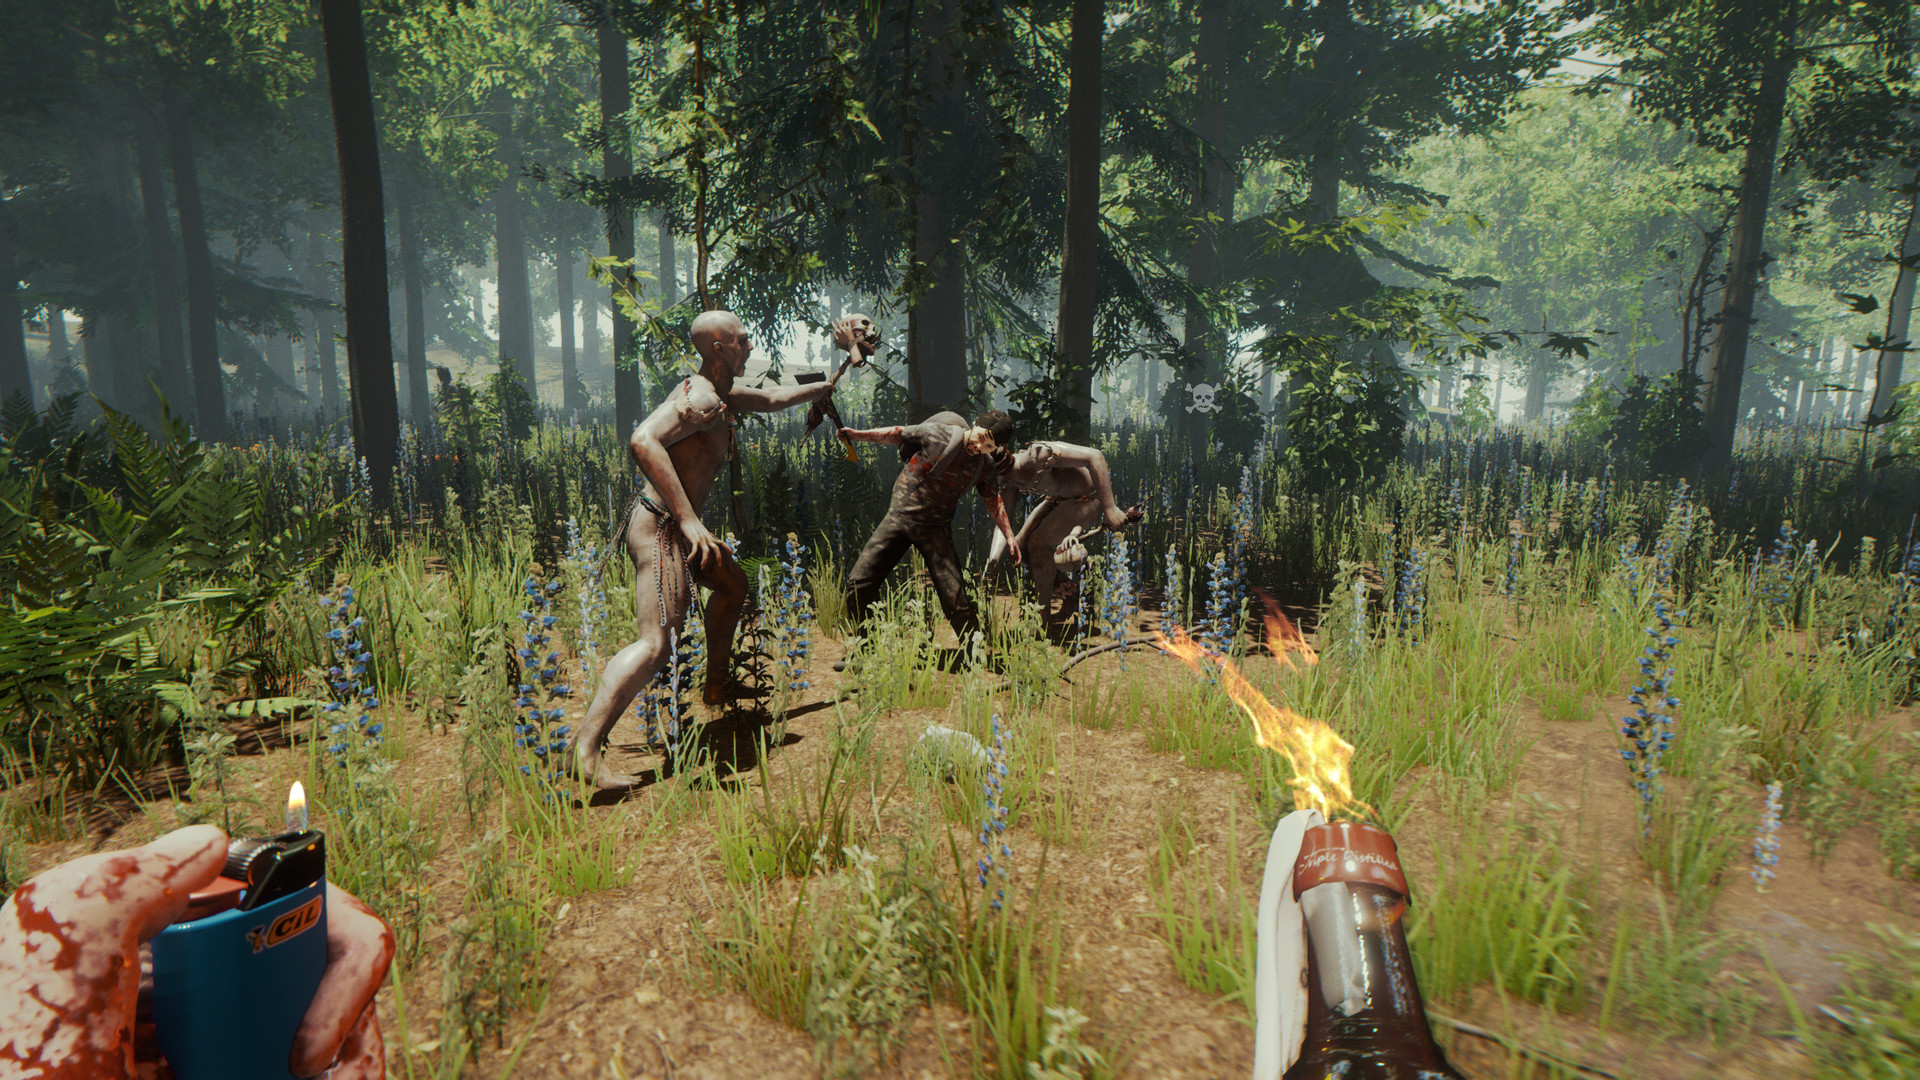 Sons Of The Forest on Steam